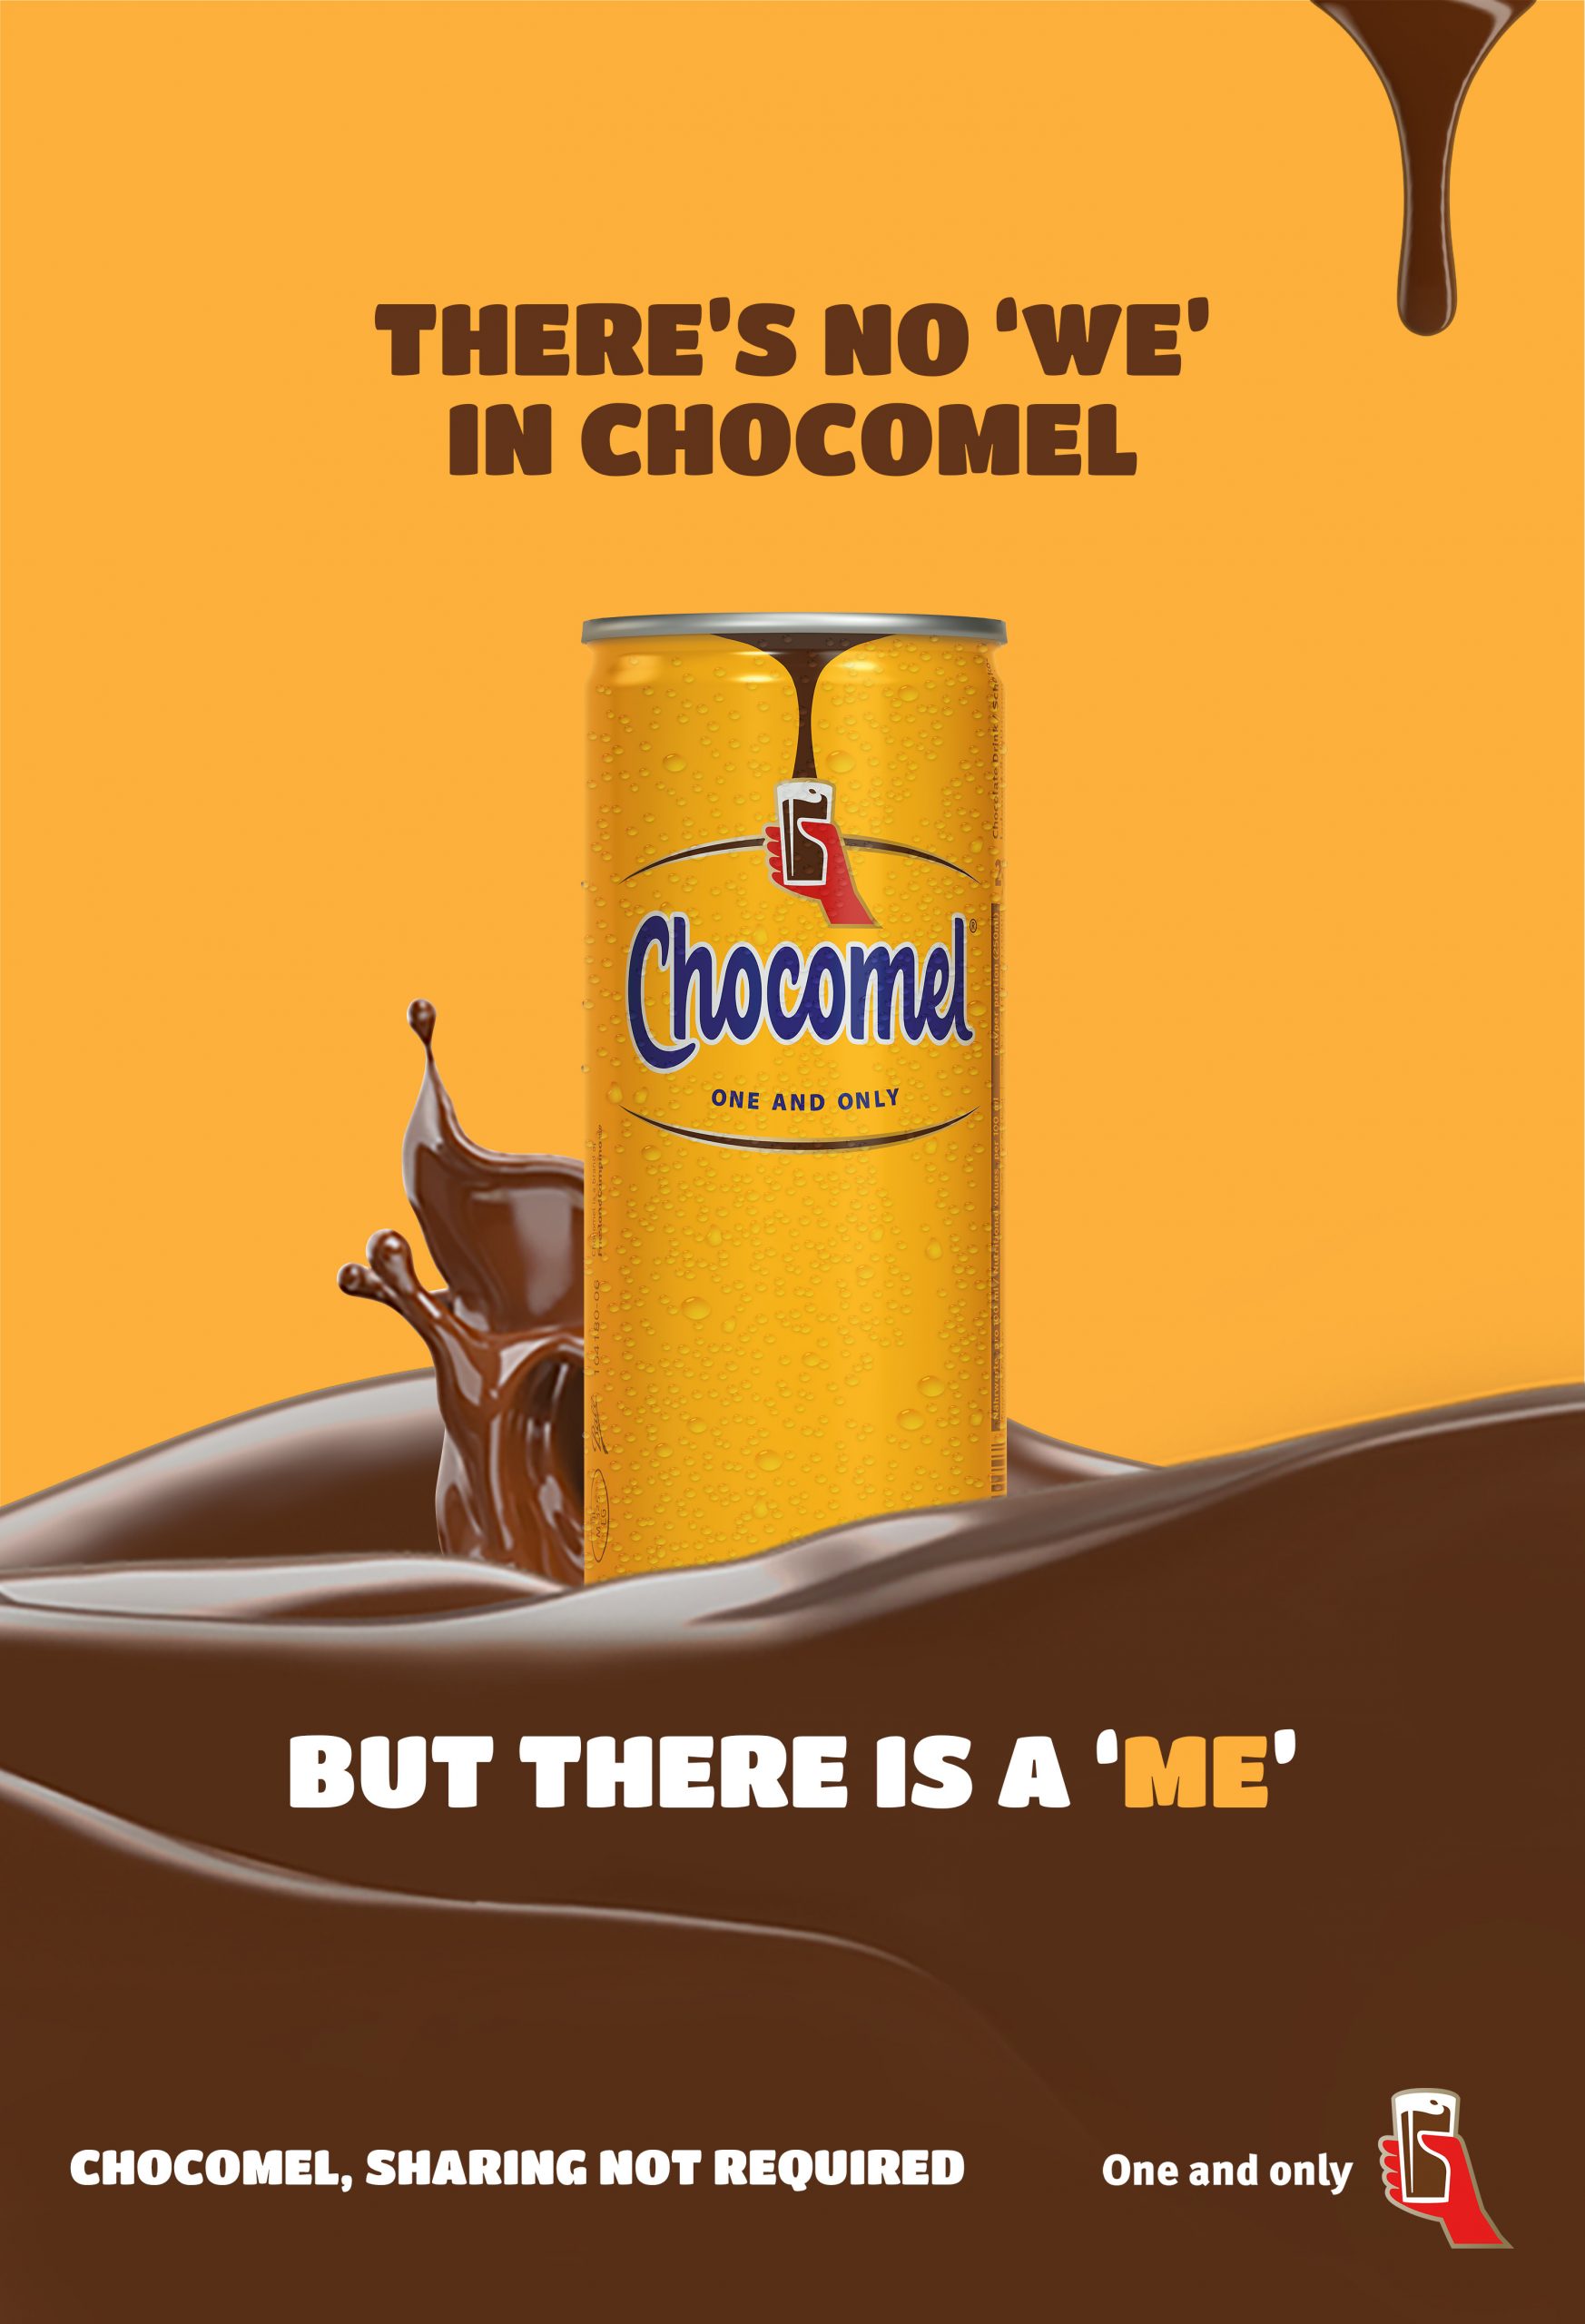 Sweet summer planned for Chocomel chocolate milk